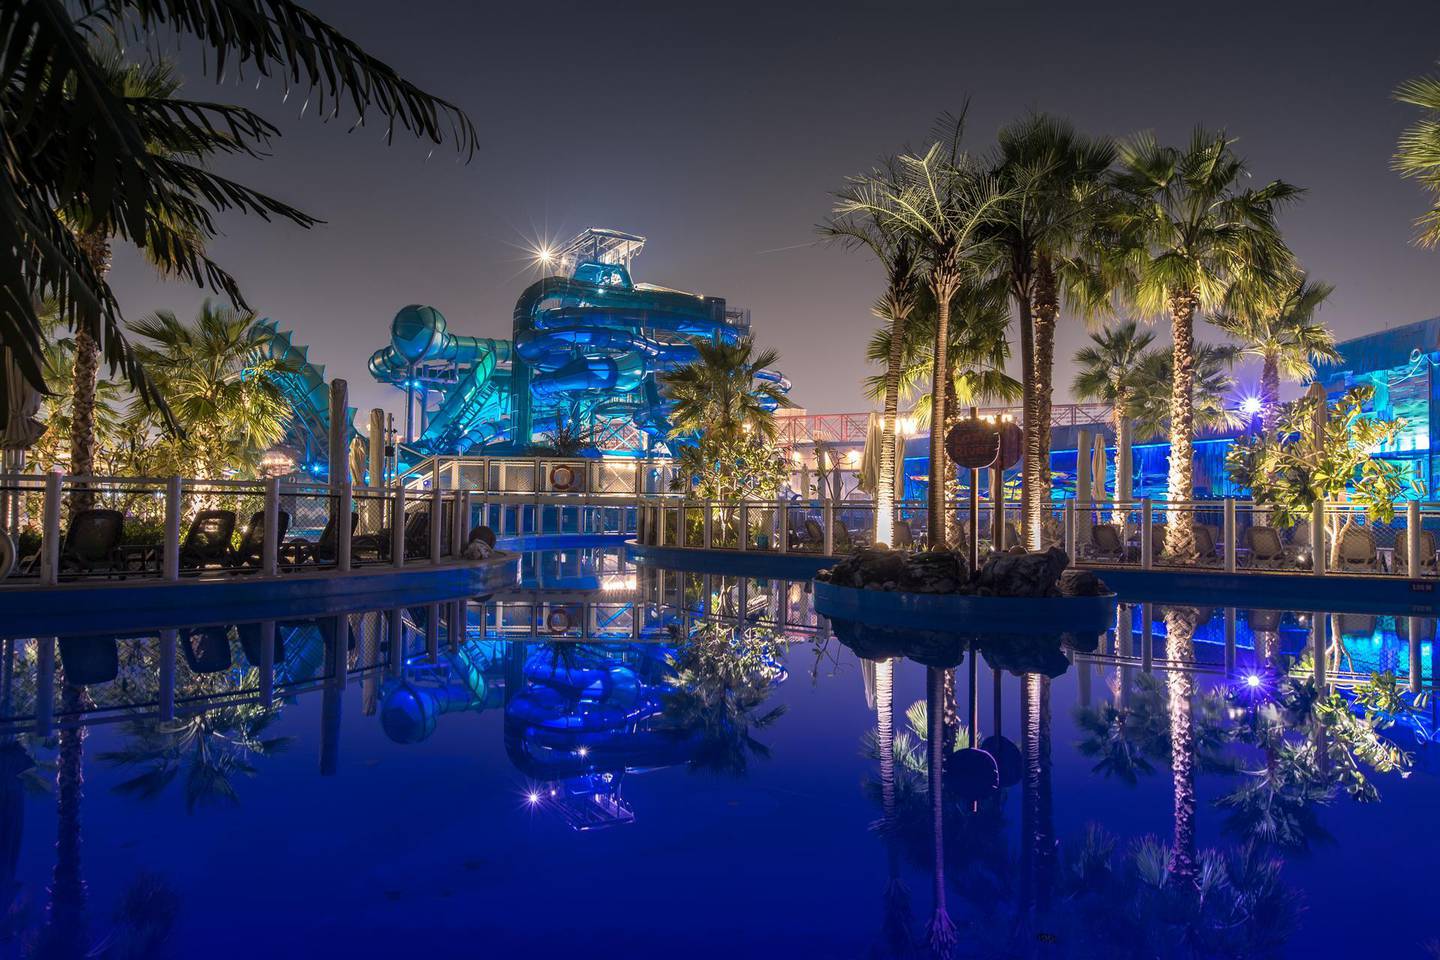 Laguna Waterpark is offering intrepid campers the chance to bed down at the Dubai attraction. Courtesy Laguna Waterpark